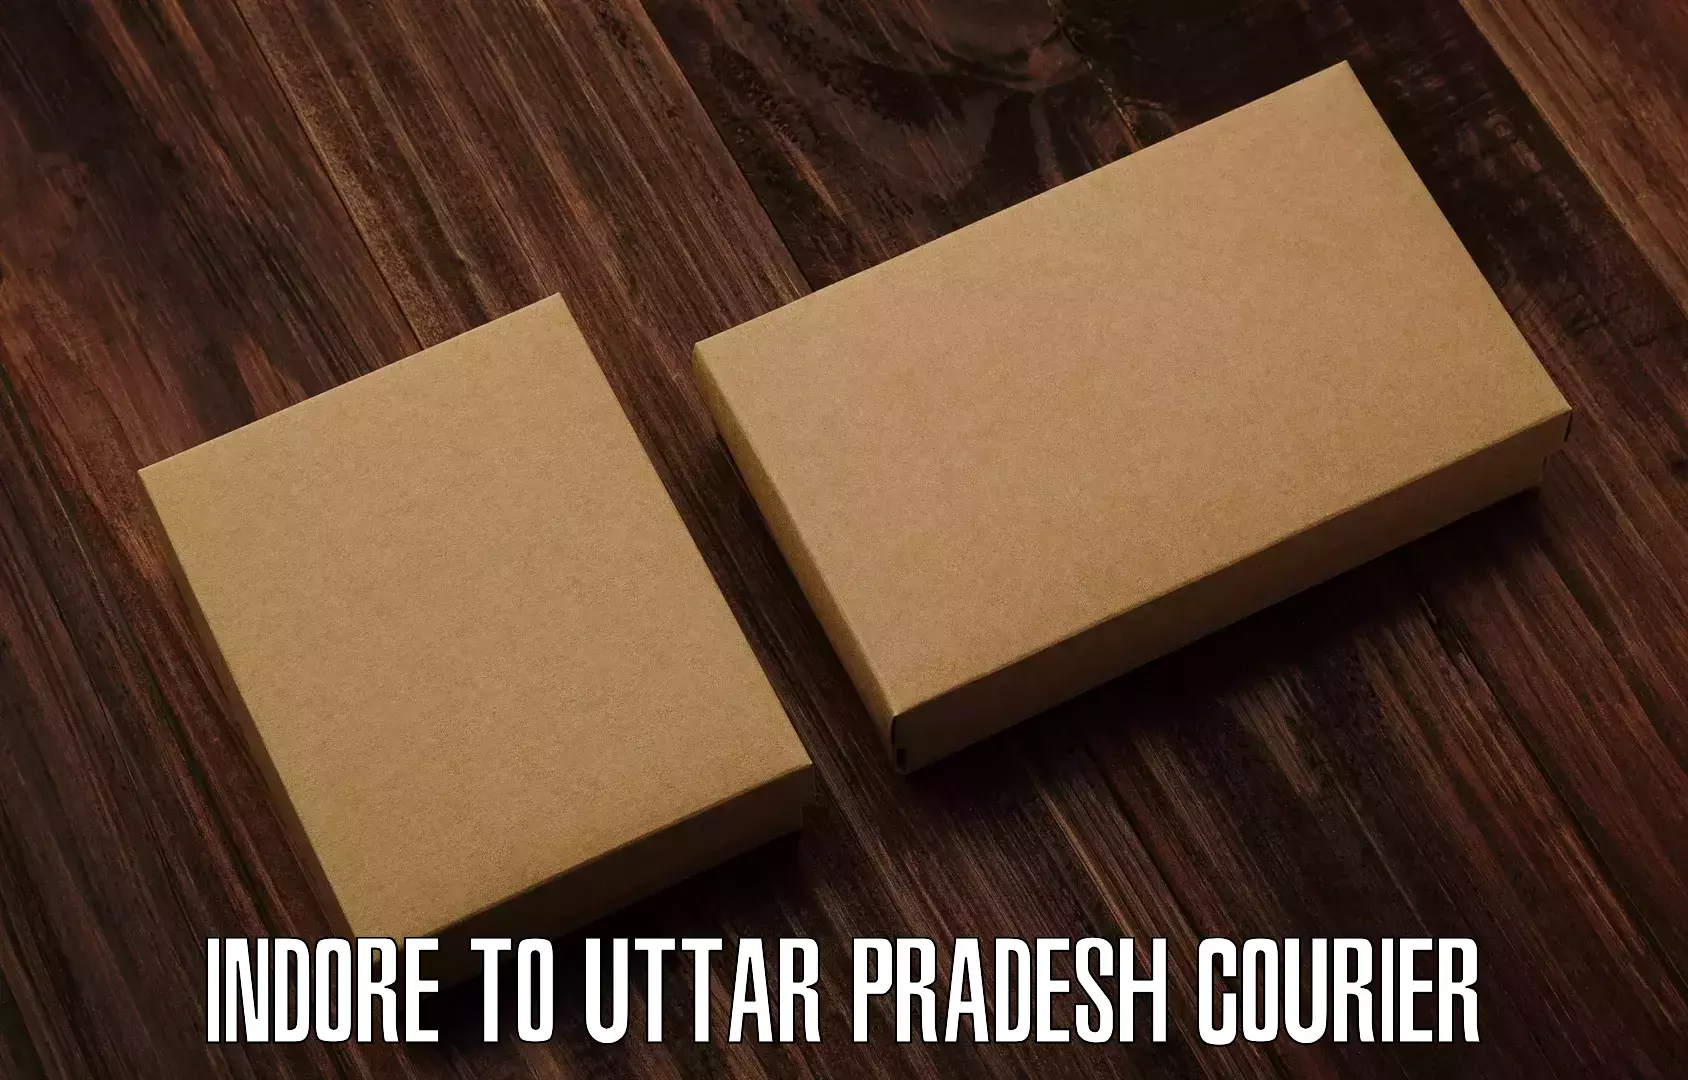 On-call courier service Indore to Bareilly